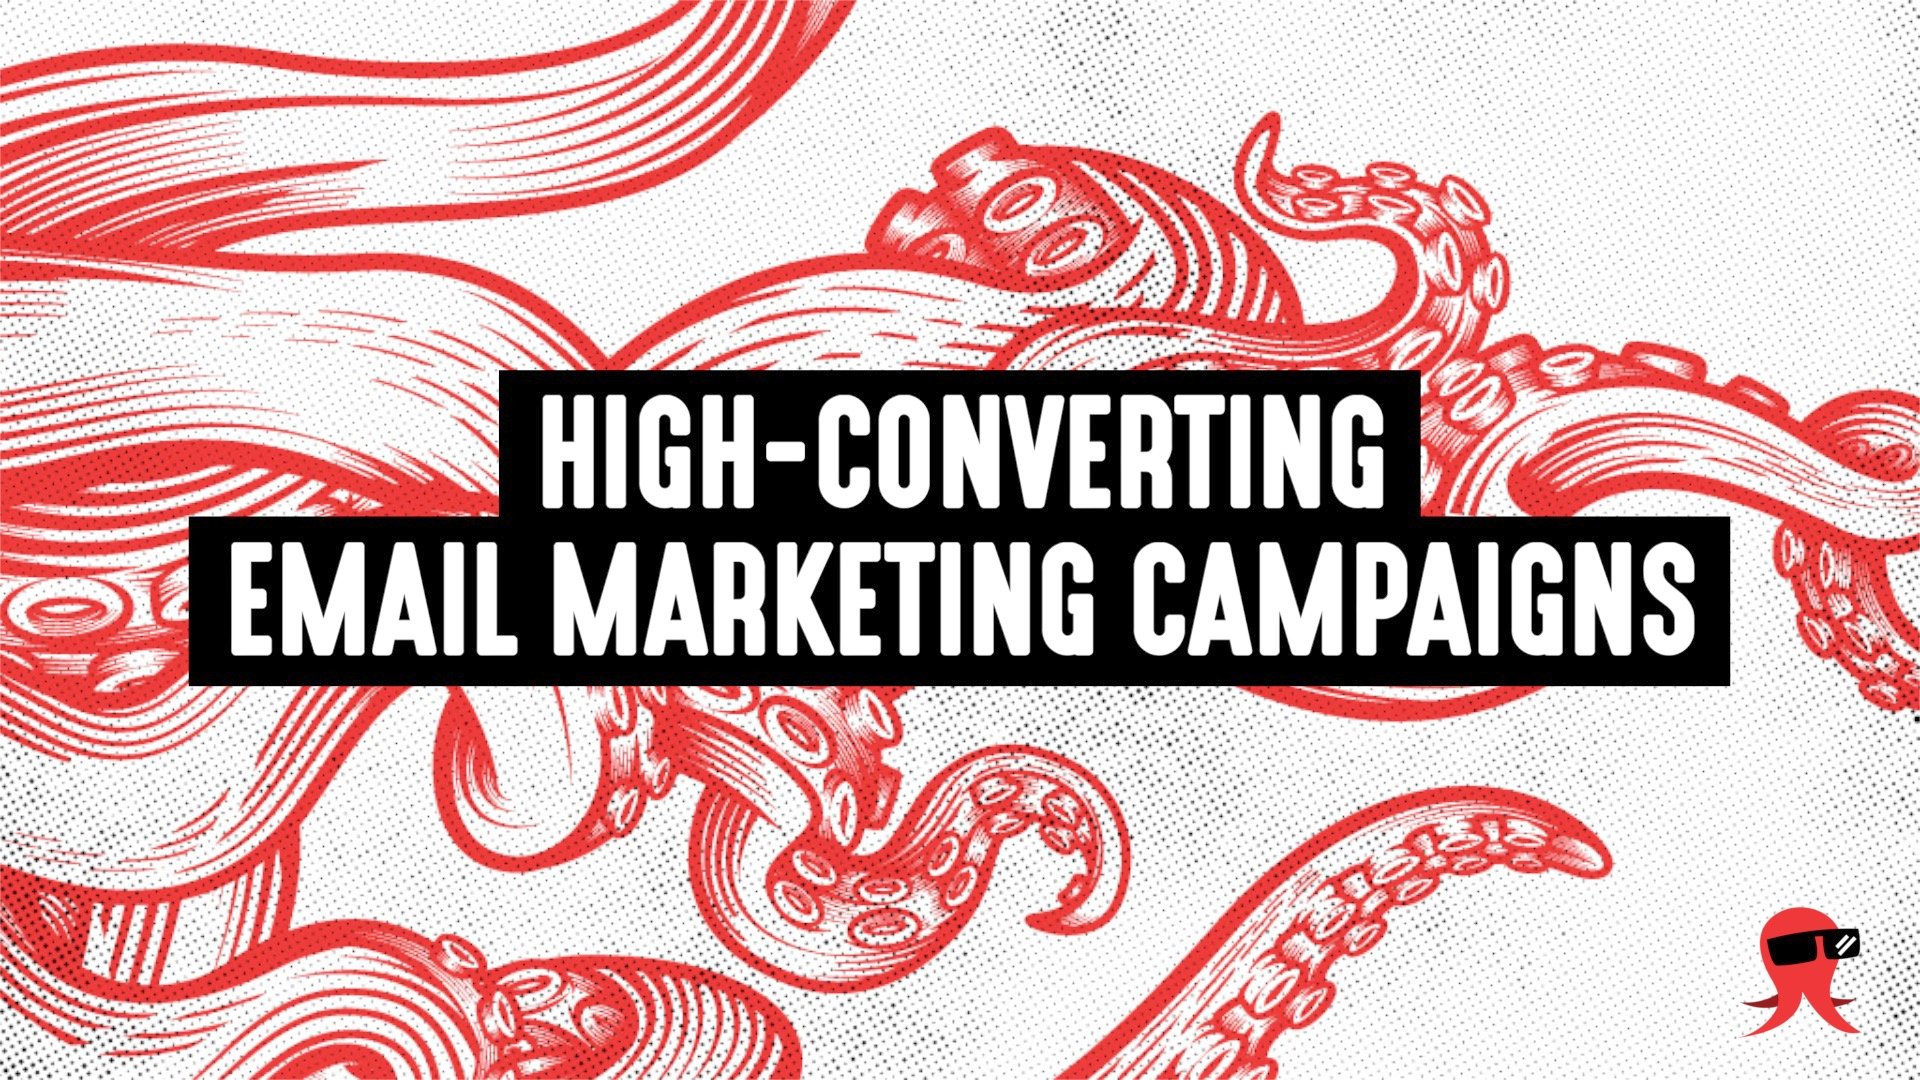 Different Types of Email Campaigns That Convert Well